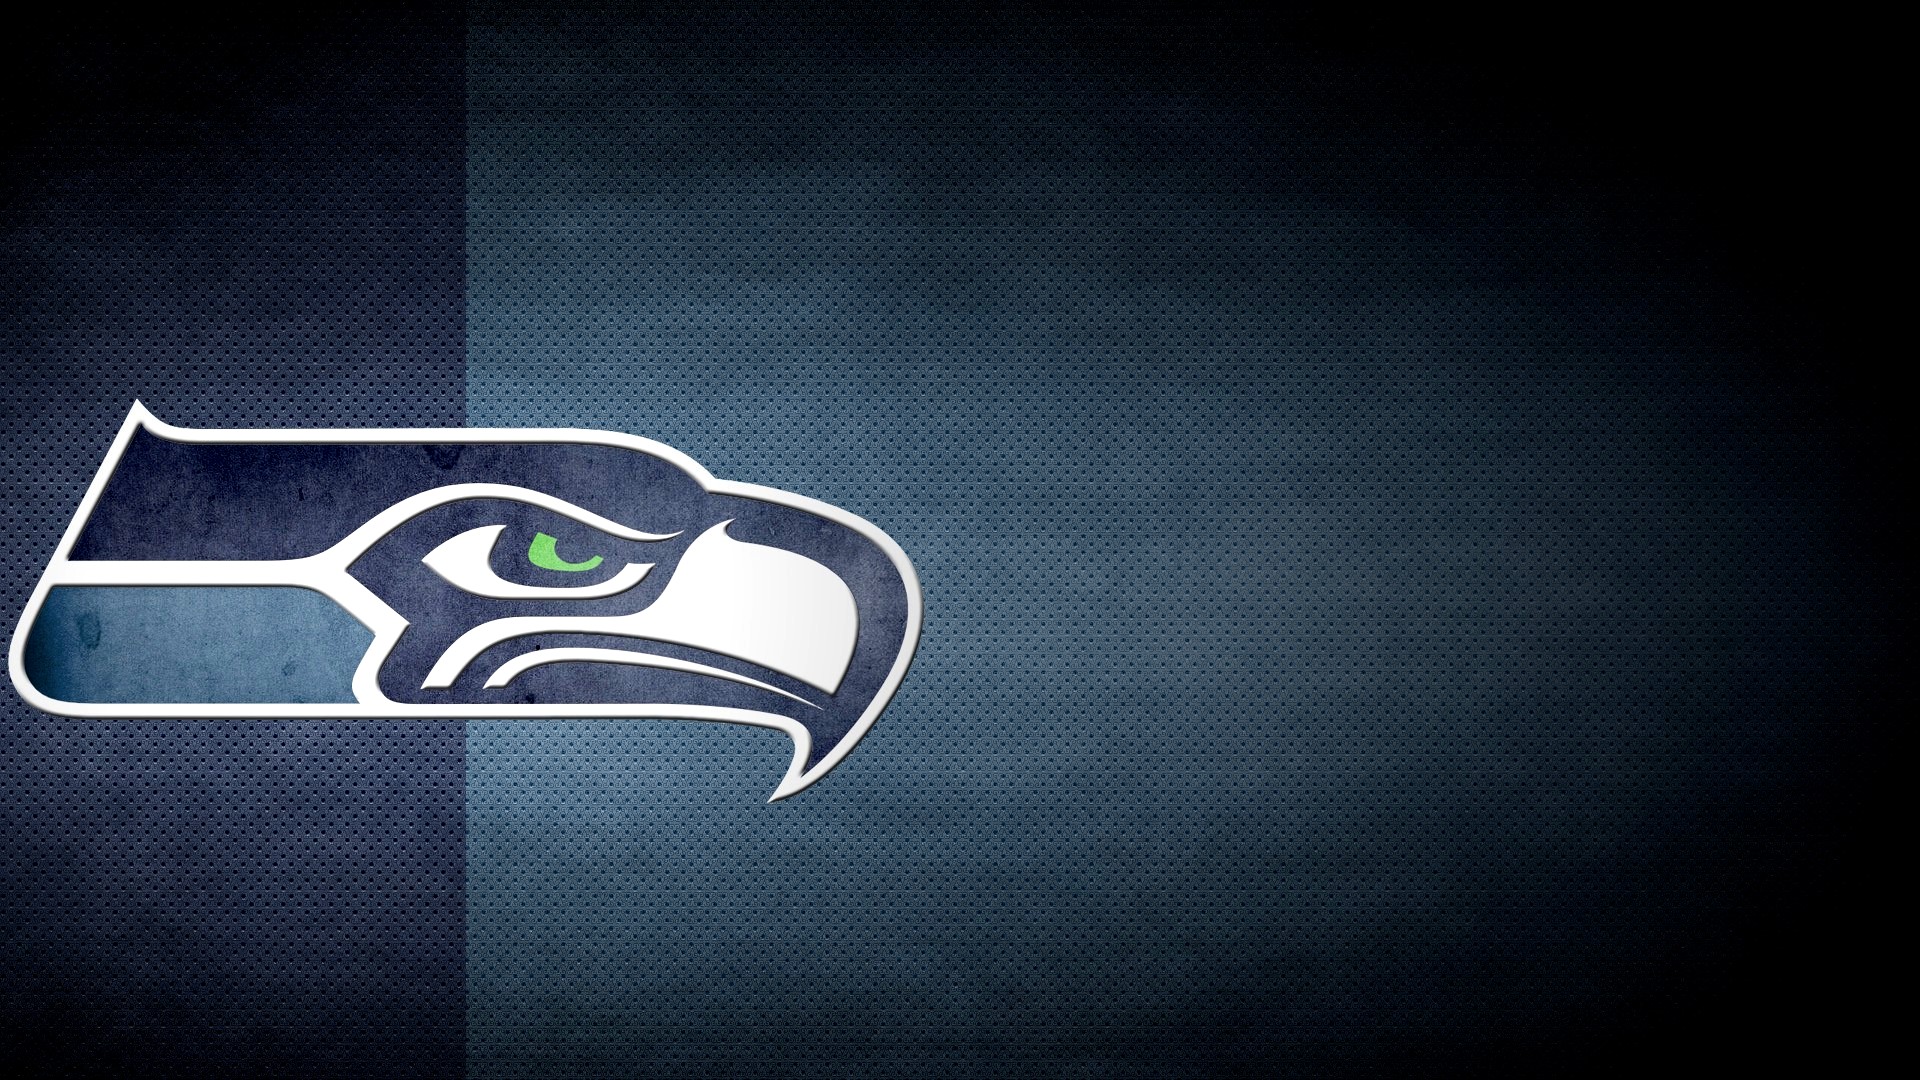 HD Seattle Seahawks Logo Backgrounds With high-resolution 1920X1080 pixel. You can use this wallpaper for your Mac or Windows Desktop Background, iPhone, Android or Tablet and another Smartphone device